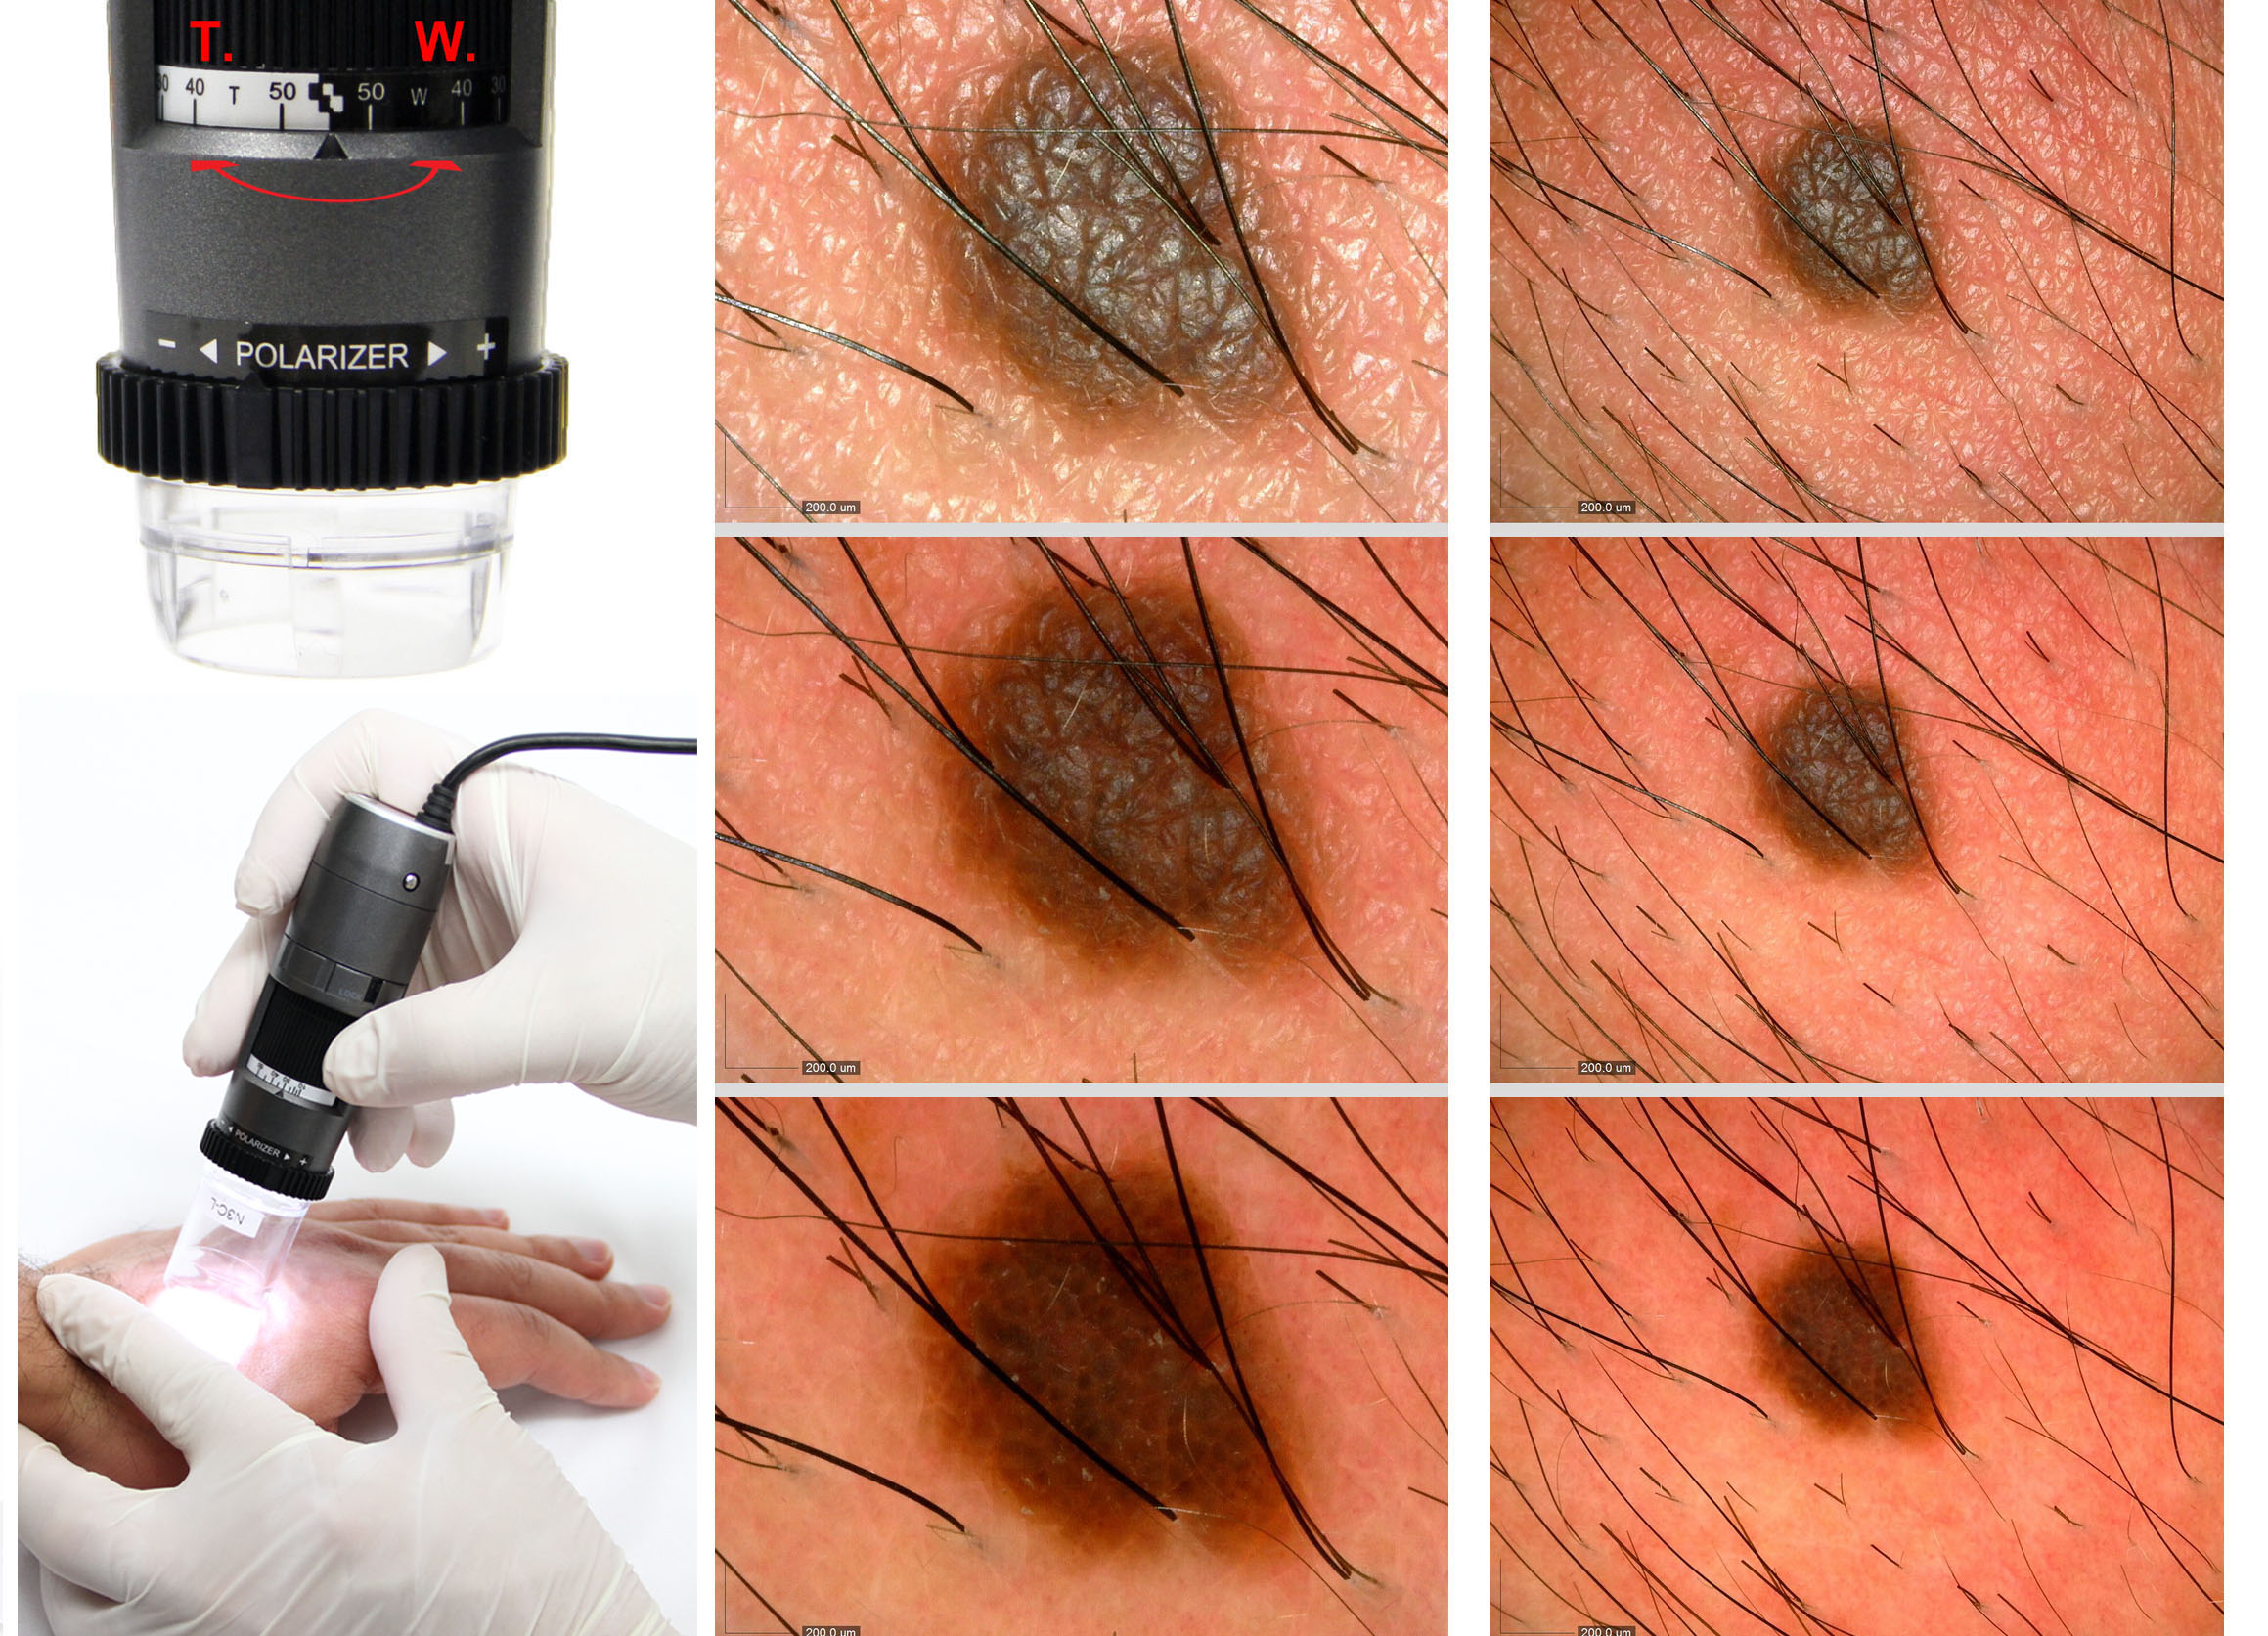 Evaluating benign and malignant skin lesions with dermascopy